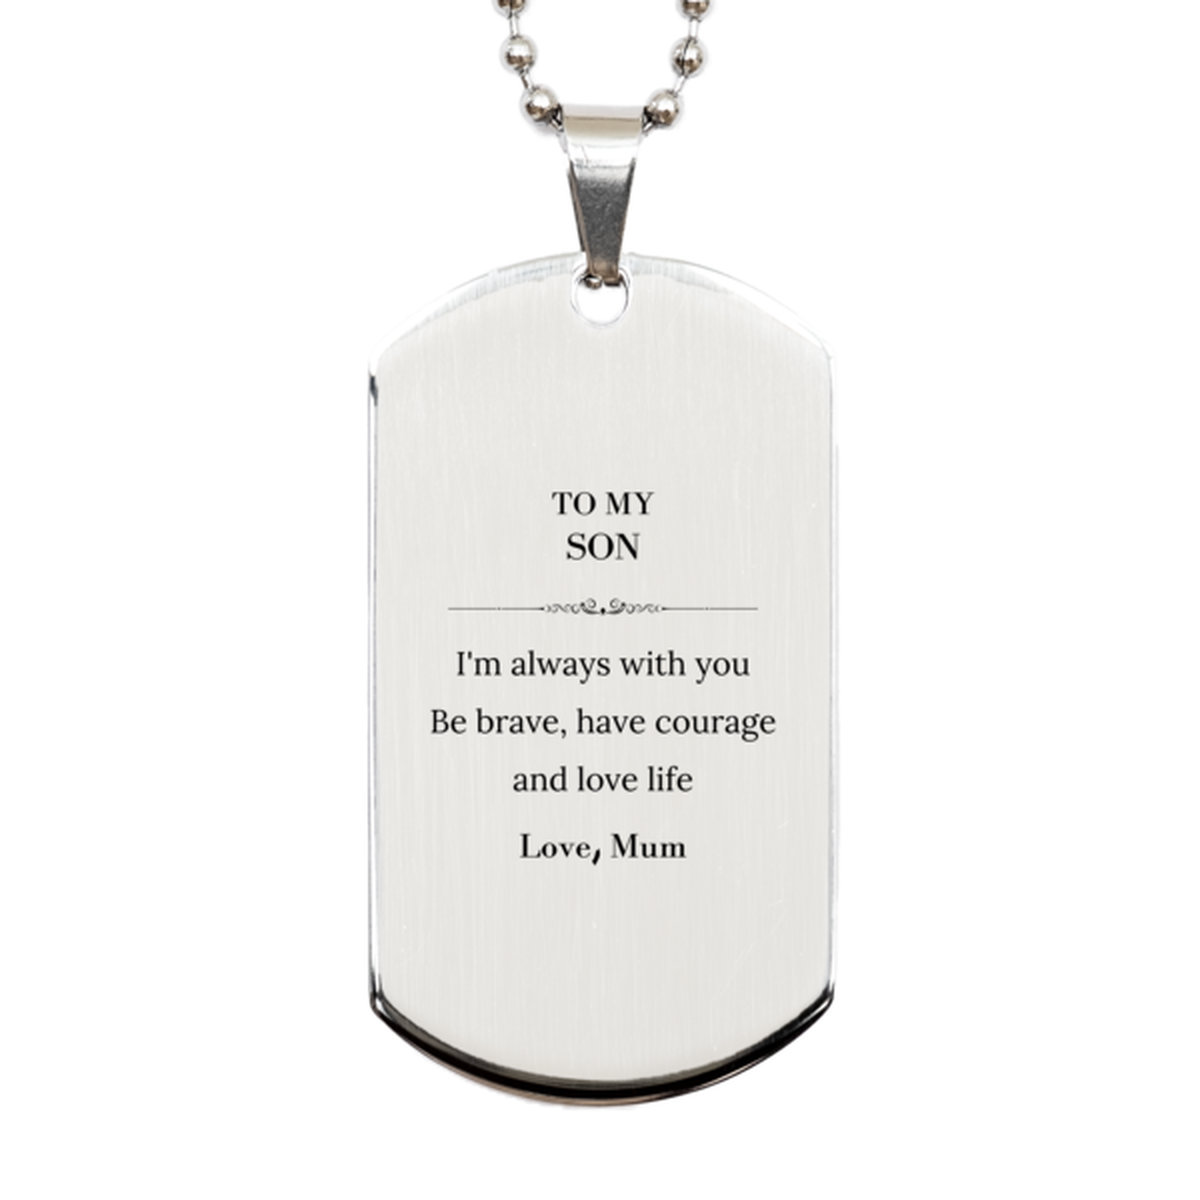 To My Son Gifts from Mum, Unique Silver Dog Tag Inspirational Christmas Birthday Graduation Gifts for Son I'm always with you. Be brave, have courage and love life. Love, Mum